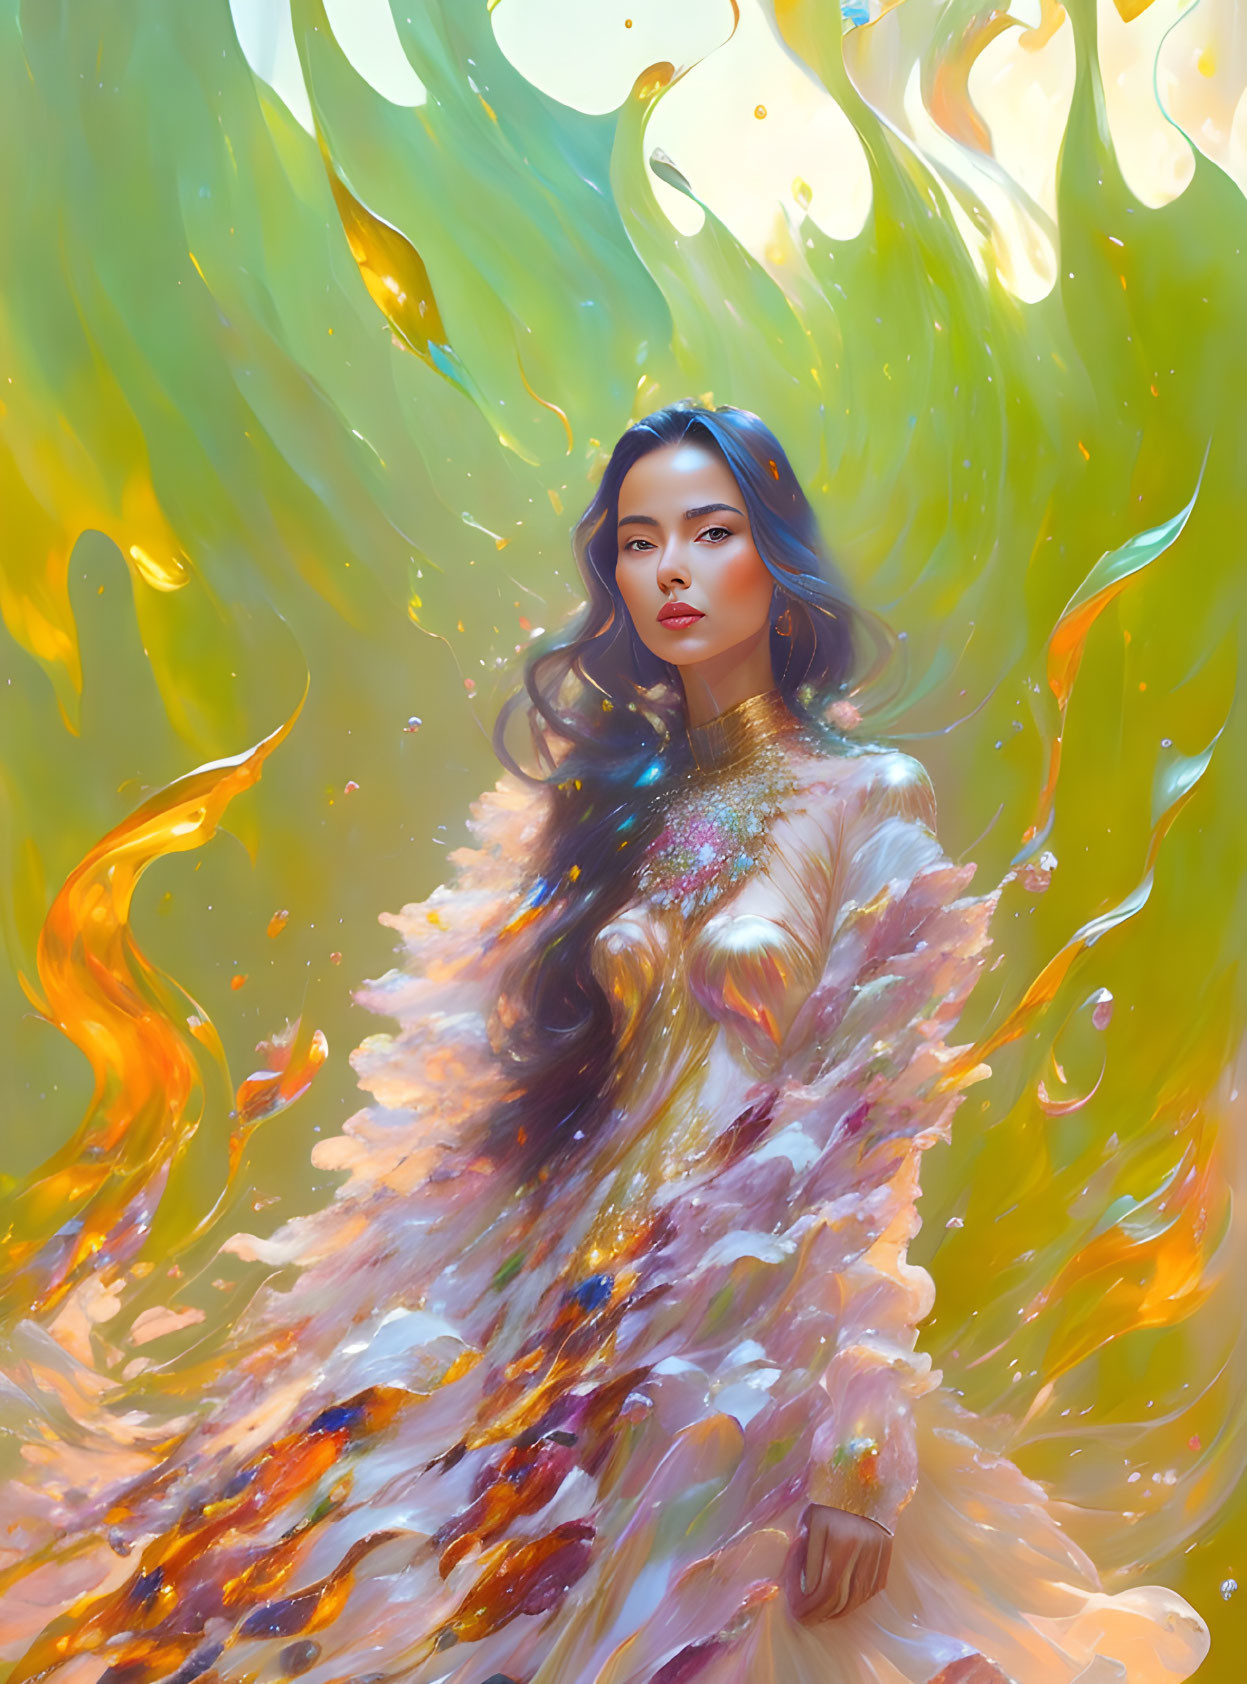 Woman in flowing dress surrounded by vibrant flames and swirled colors